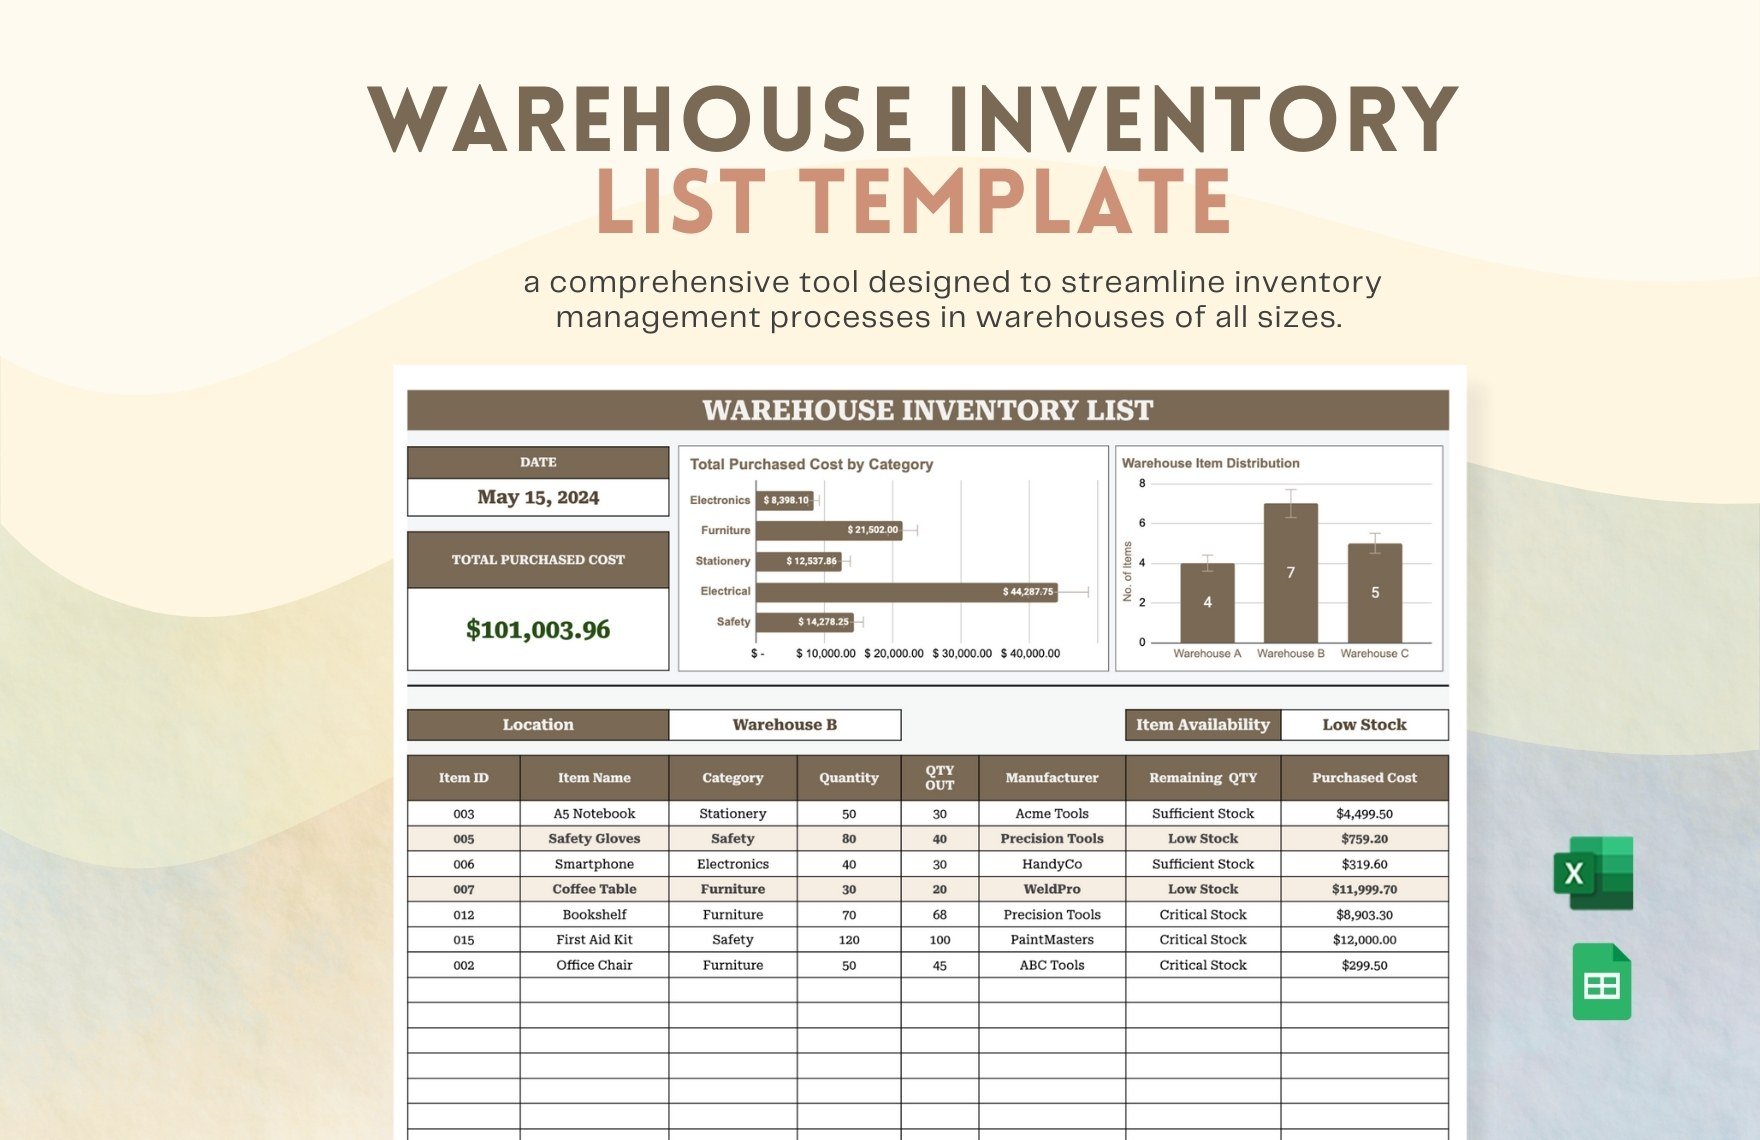 Warehouse Inventory List Template in Excel, Google Sheets